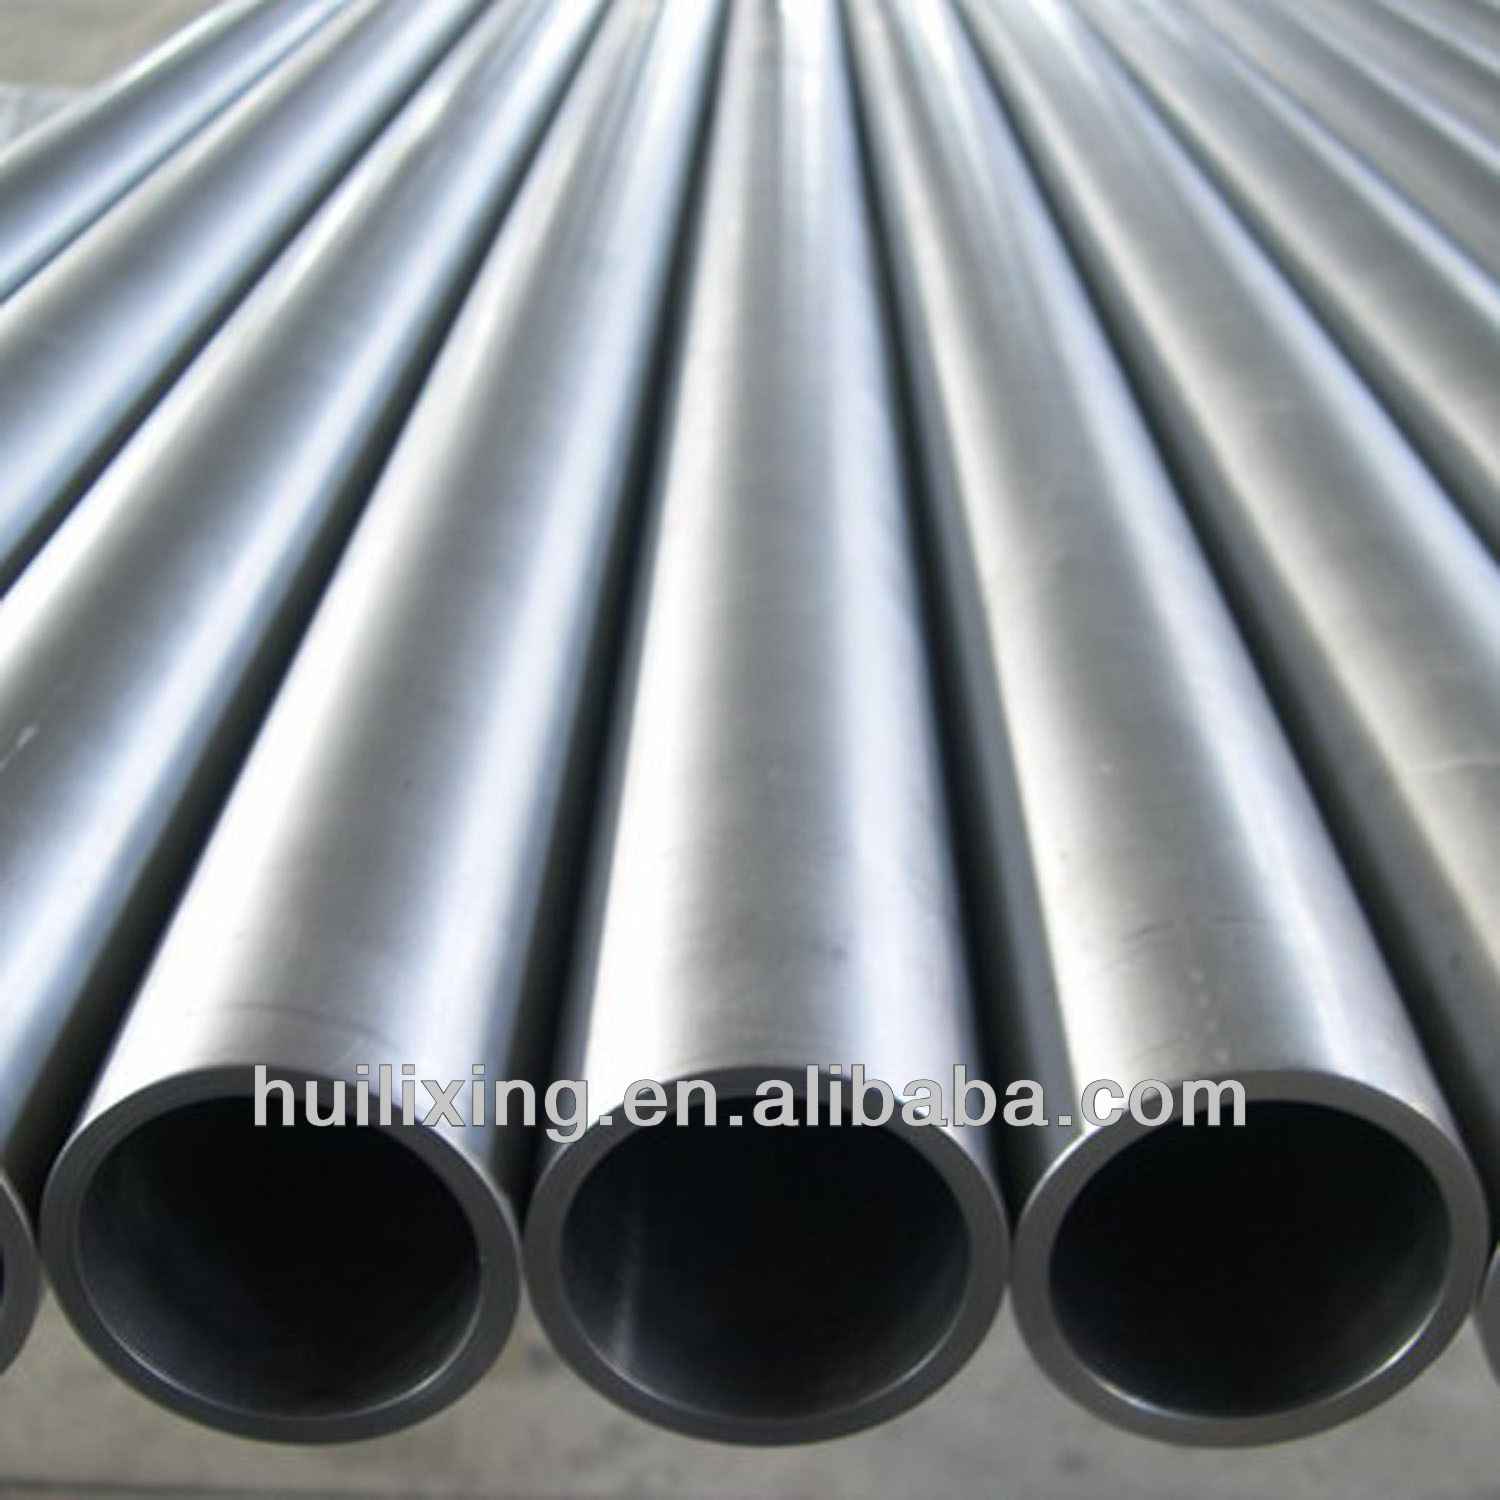 Stainless steel pipes photo